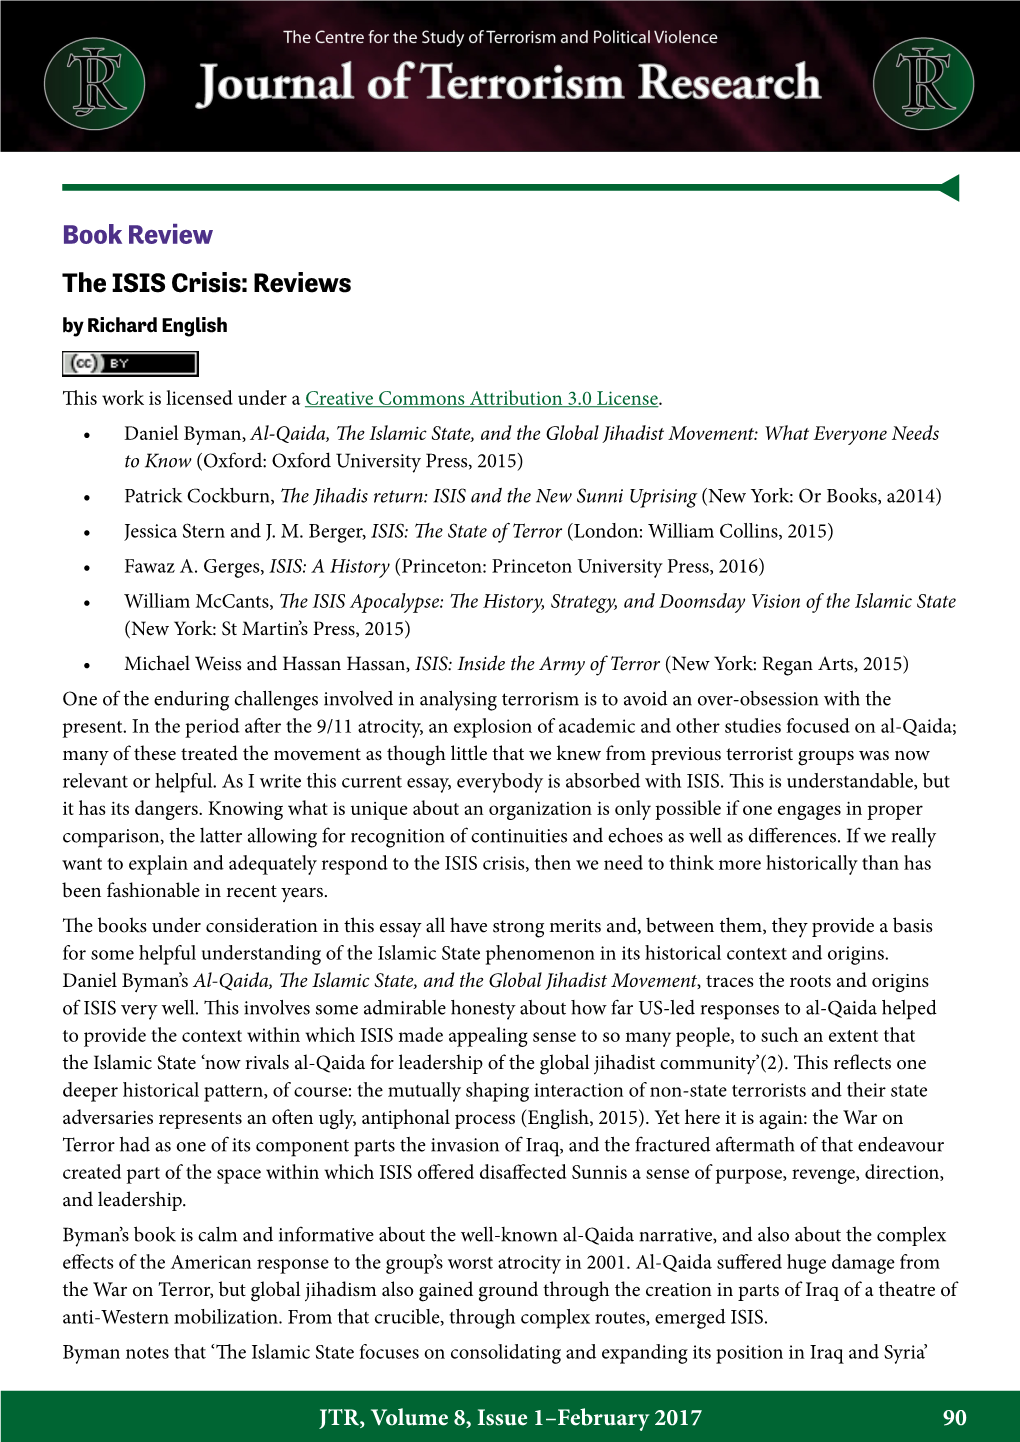 Book Review the ISIS Crisis: Reviews by Richard English